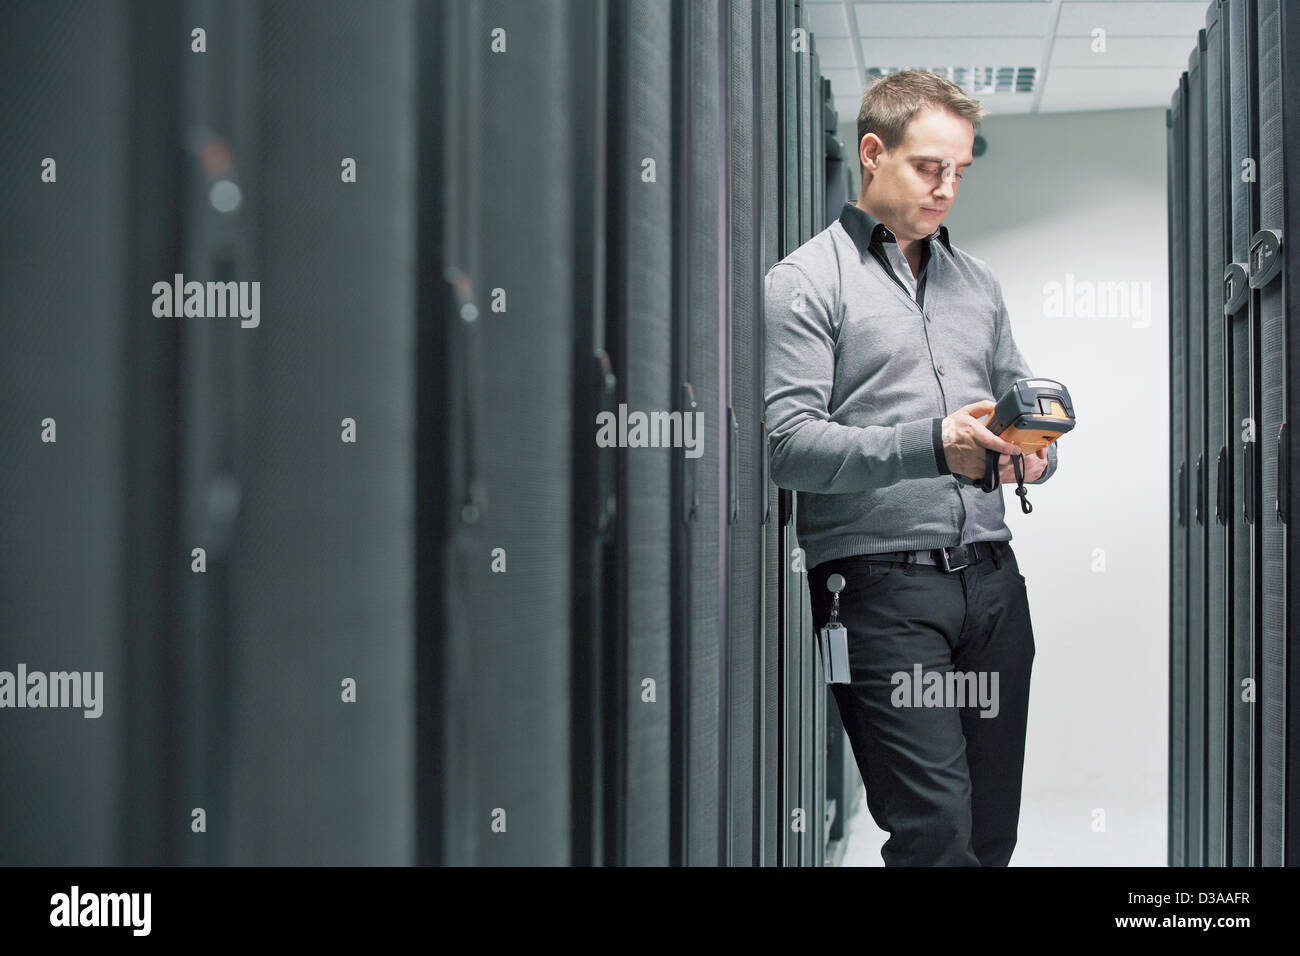 Man working in server room Stock Photo